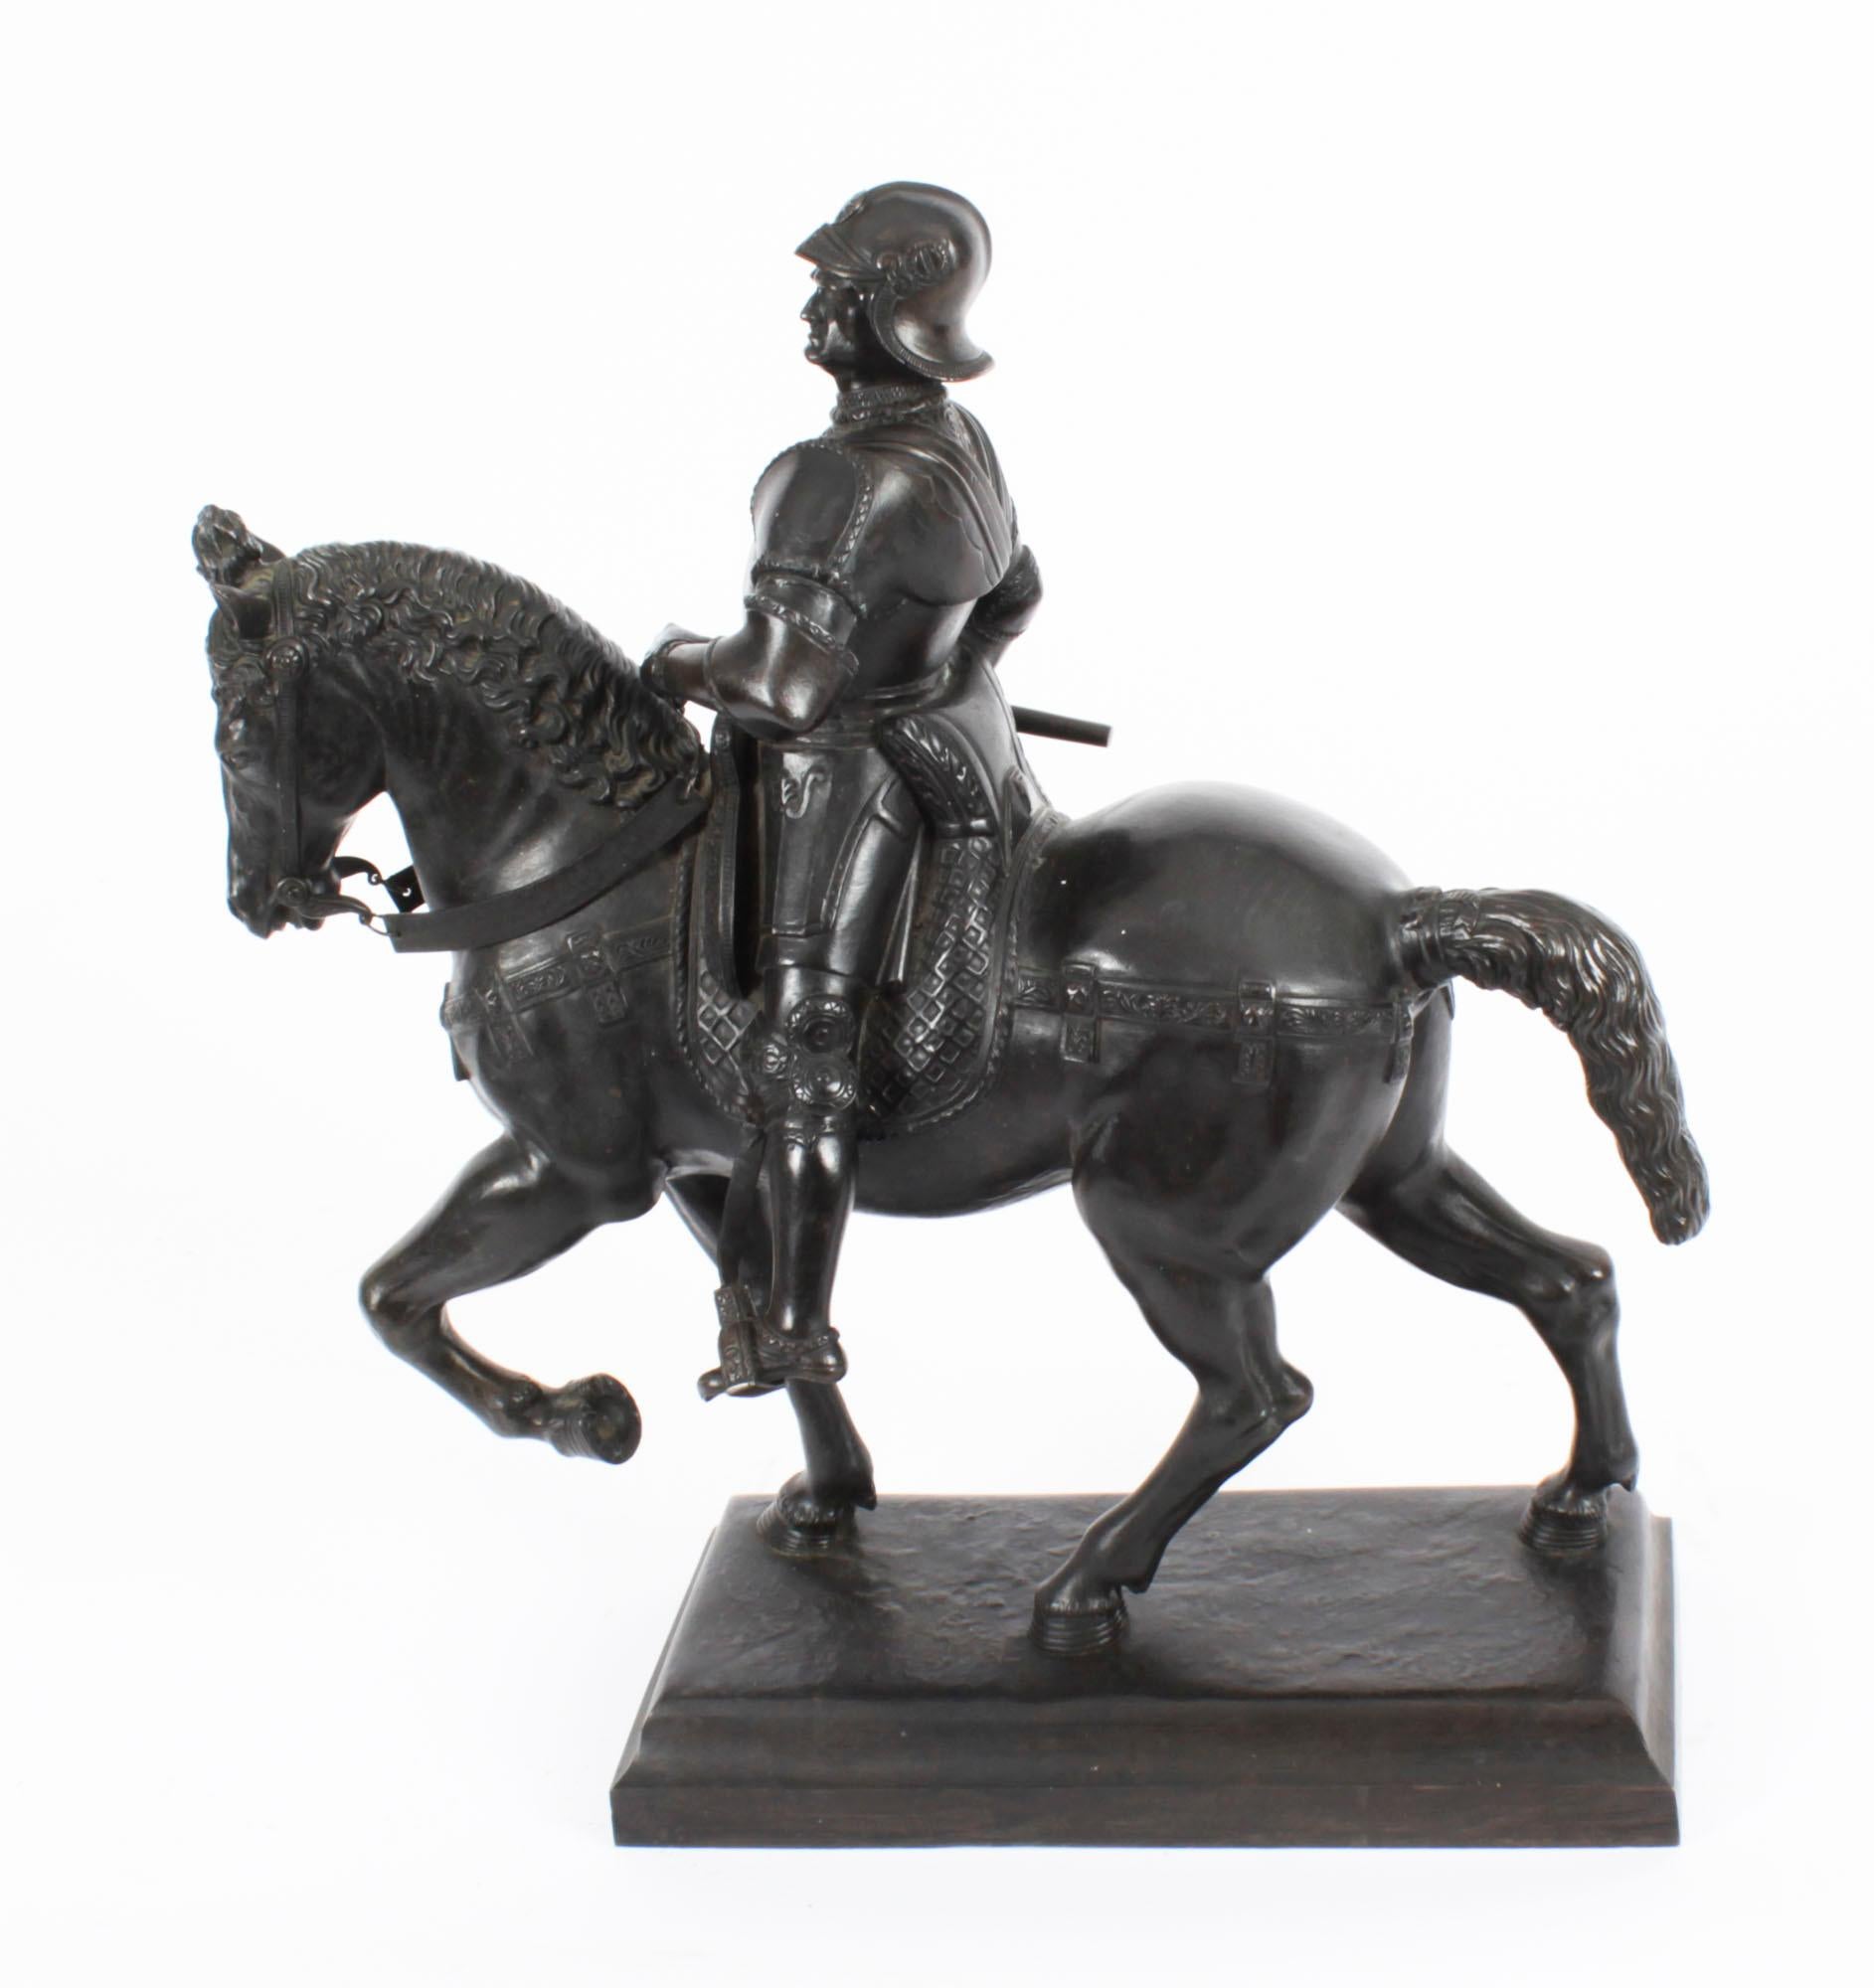 This is a superb large antique patinated bronze Equestrian Statue of Bartolomeo Colleoni, signed Verrochio on the base, circa 1860 in date.
 
This stunning patinated bronze statue is after the original Renaissance sculpture which was executed by